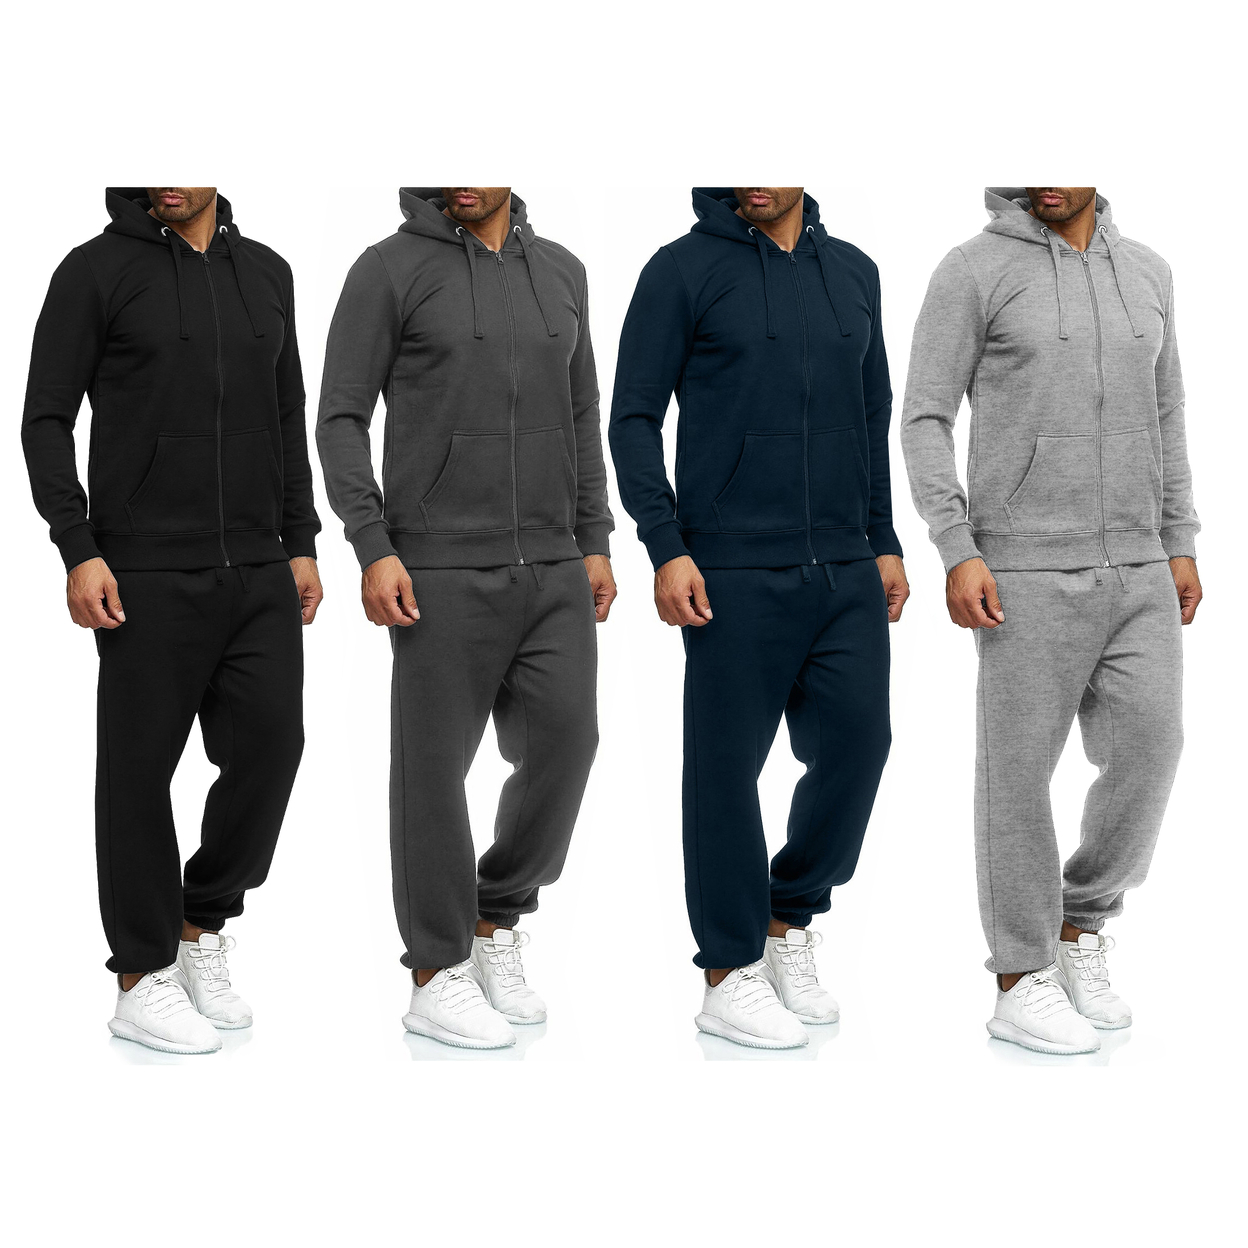 2-Pack: Men's Casual Big & Tall Athletic Active Winter Warm Fleece Lined Full Zip Tracksuit Jogger Set - Navy, Large